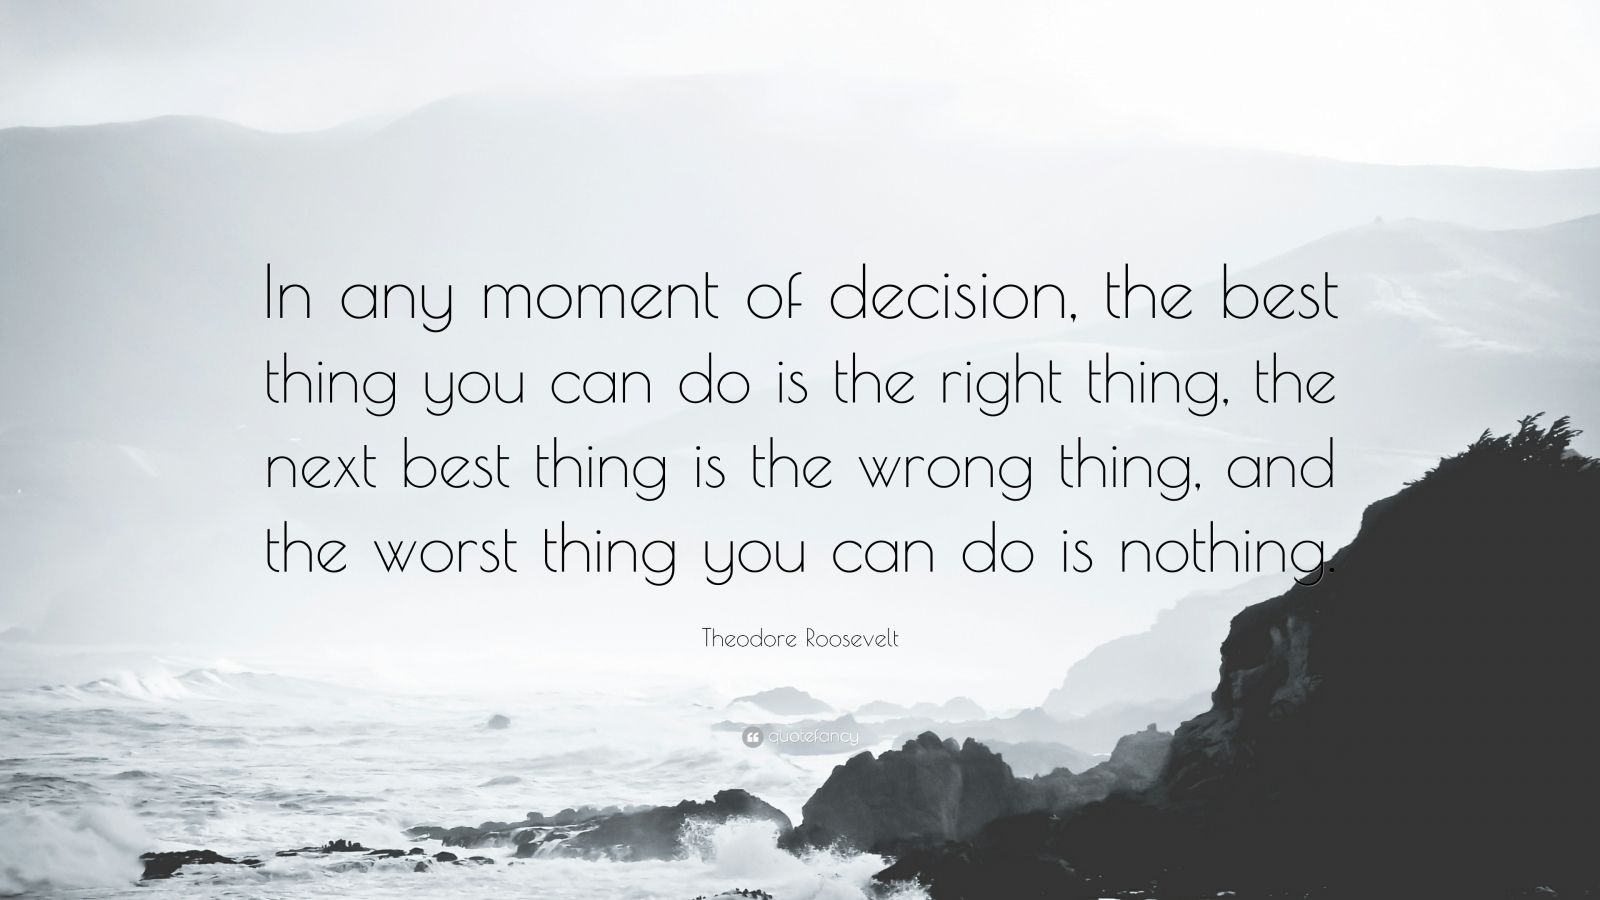 37883 Theodore Roosevelt Quote In any moment of decision the best thing